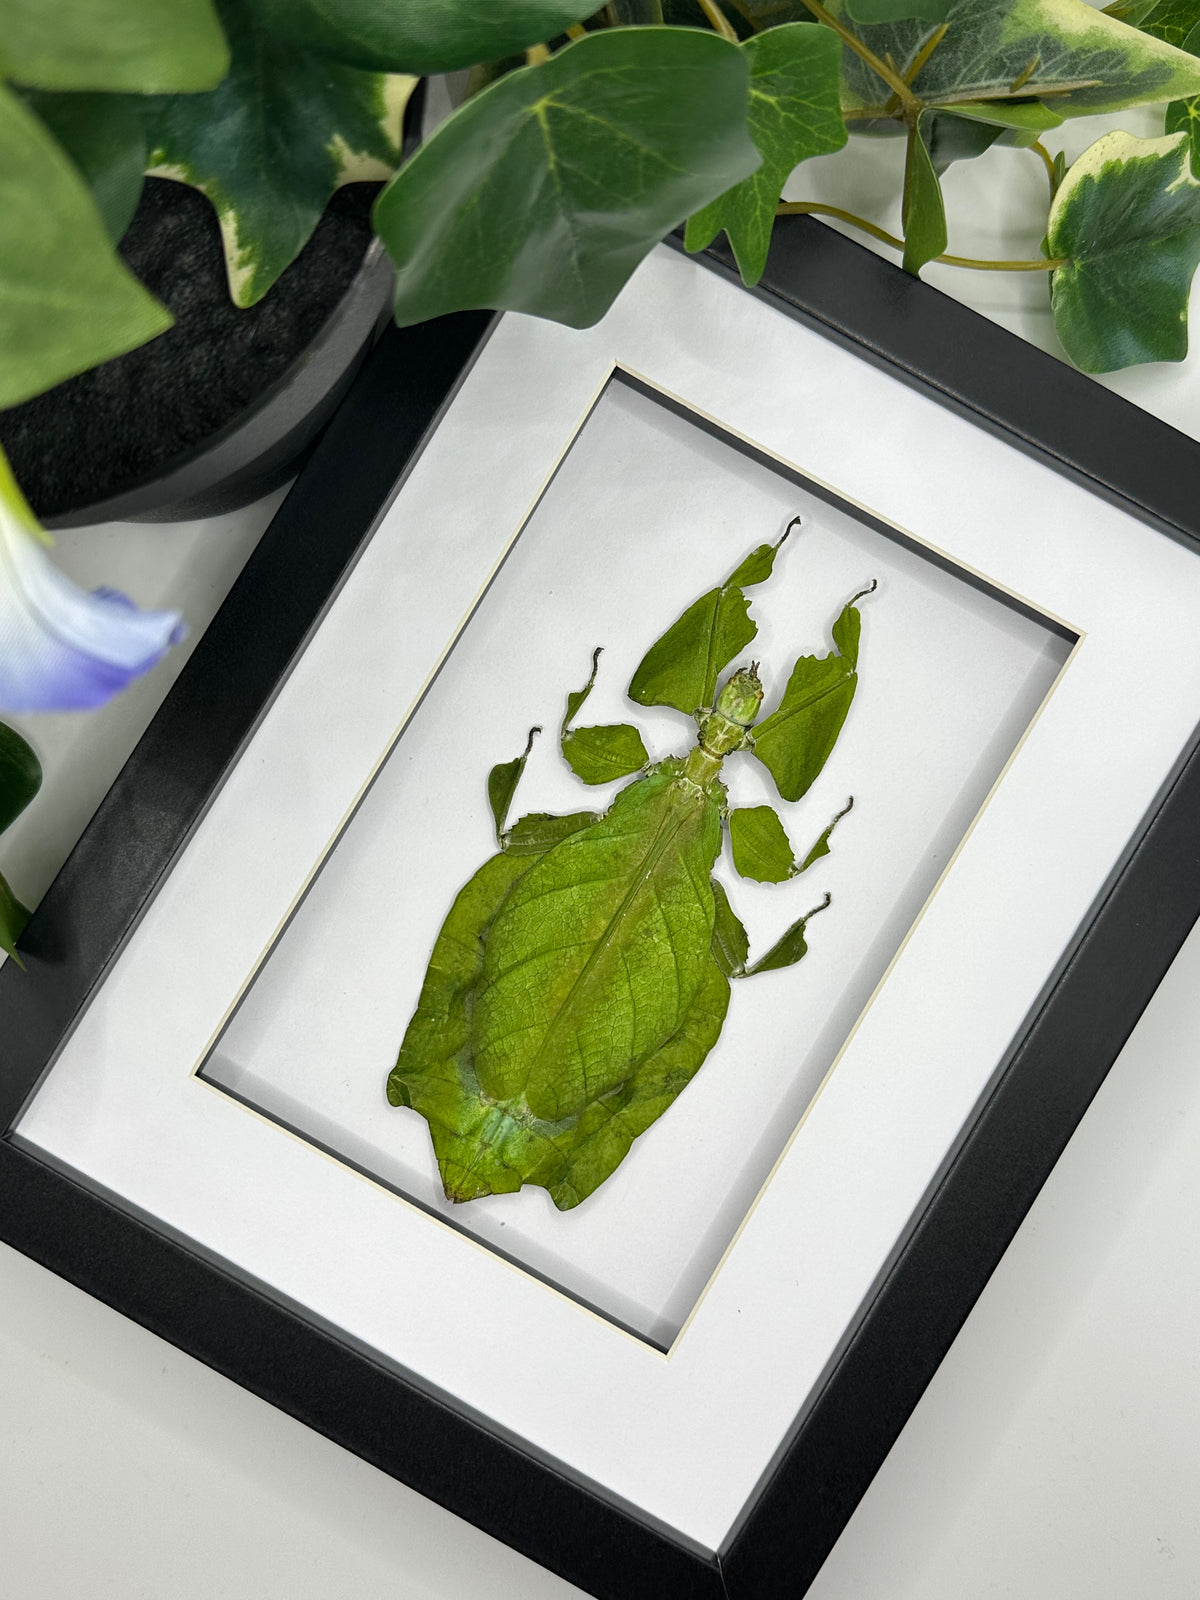 Giant Malaysian Leaf Insect / Phyllium Giganteum in a frame